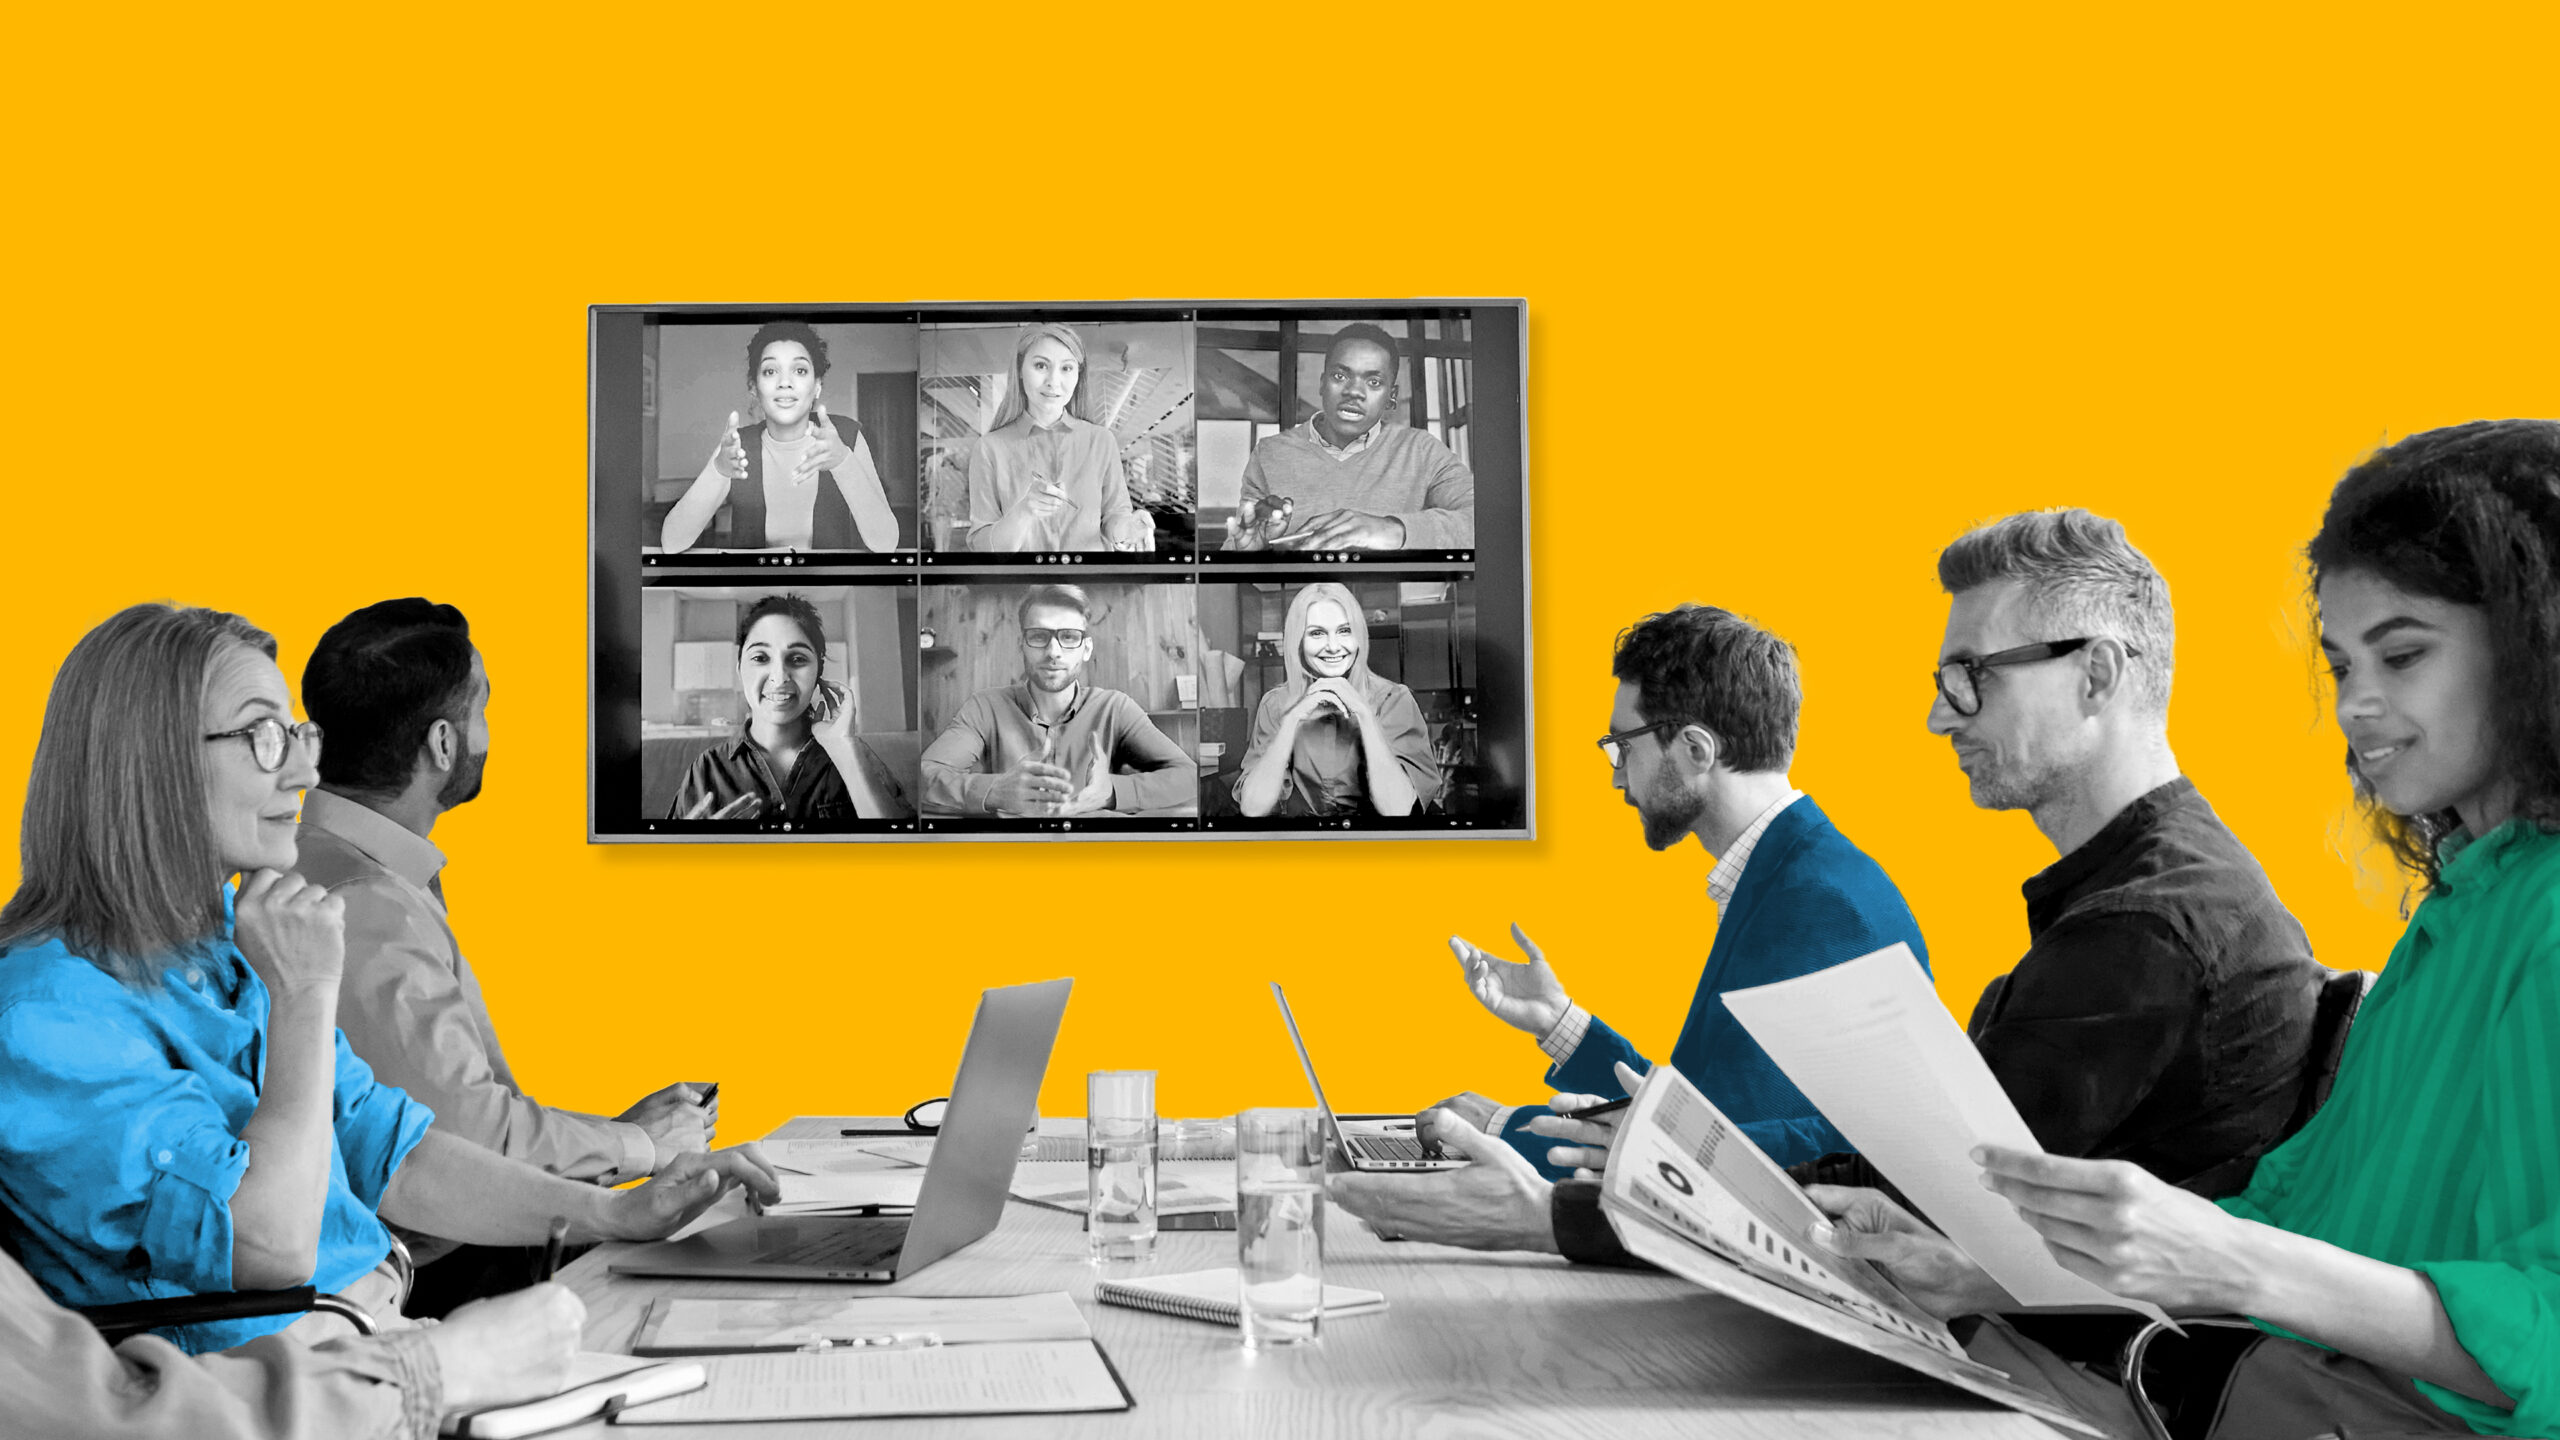 This image features people sitting around a table and more people engaging in the conversation through video conferencing. This image represents driving community through video marketing.